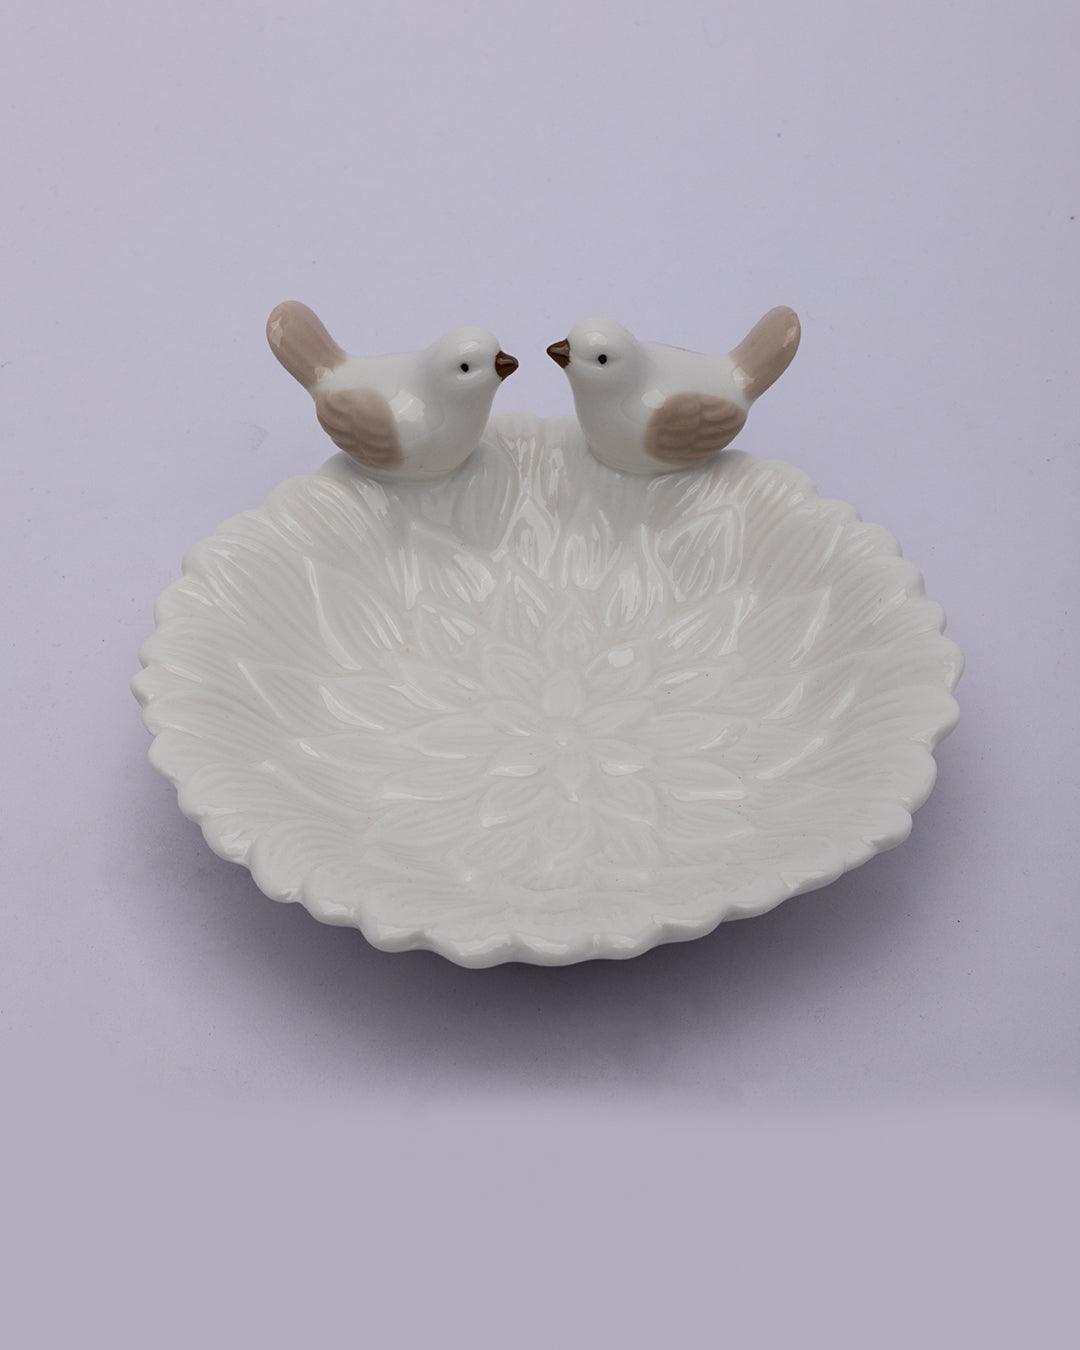 Jewellery Holder Tray, Crafted Bird, for Dressing Table, Ring Dash, Round, White, Ceramic - MARKET 99